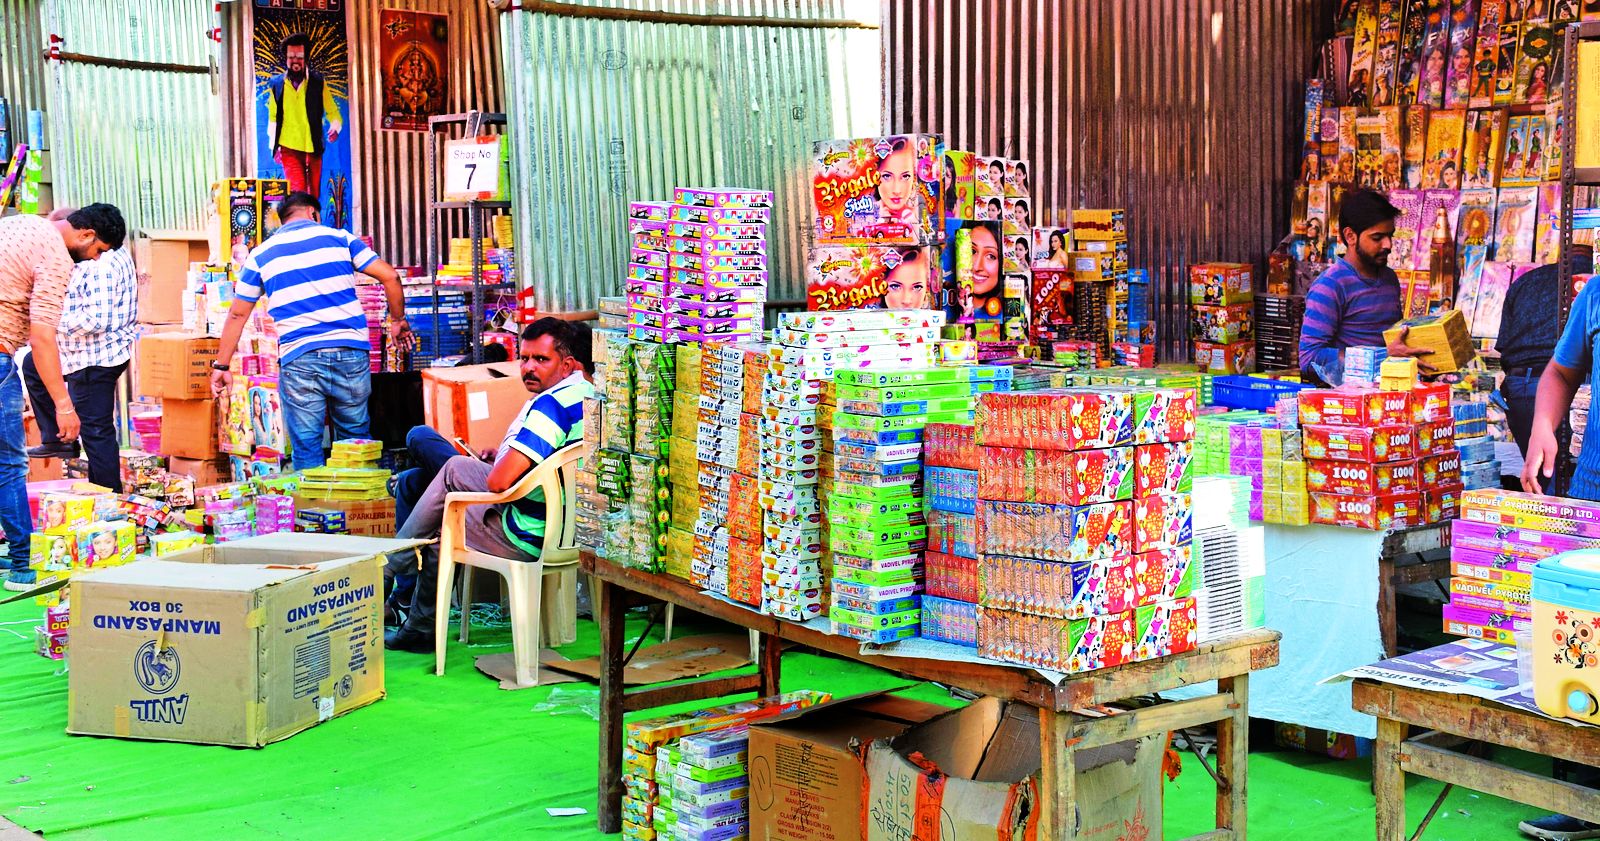 DIWALI 2017: crackers market in udaipur rules and regulations